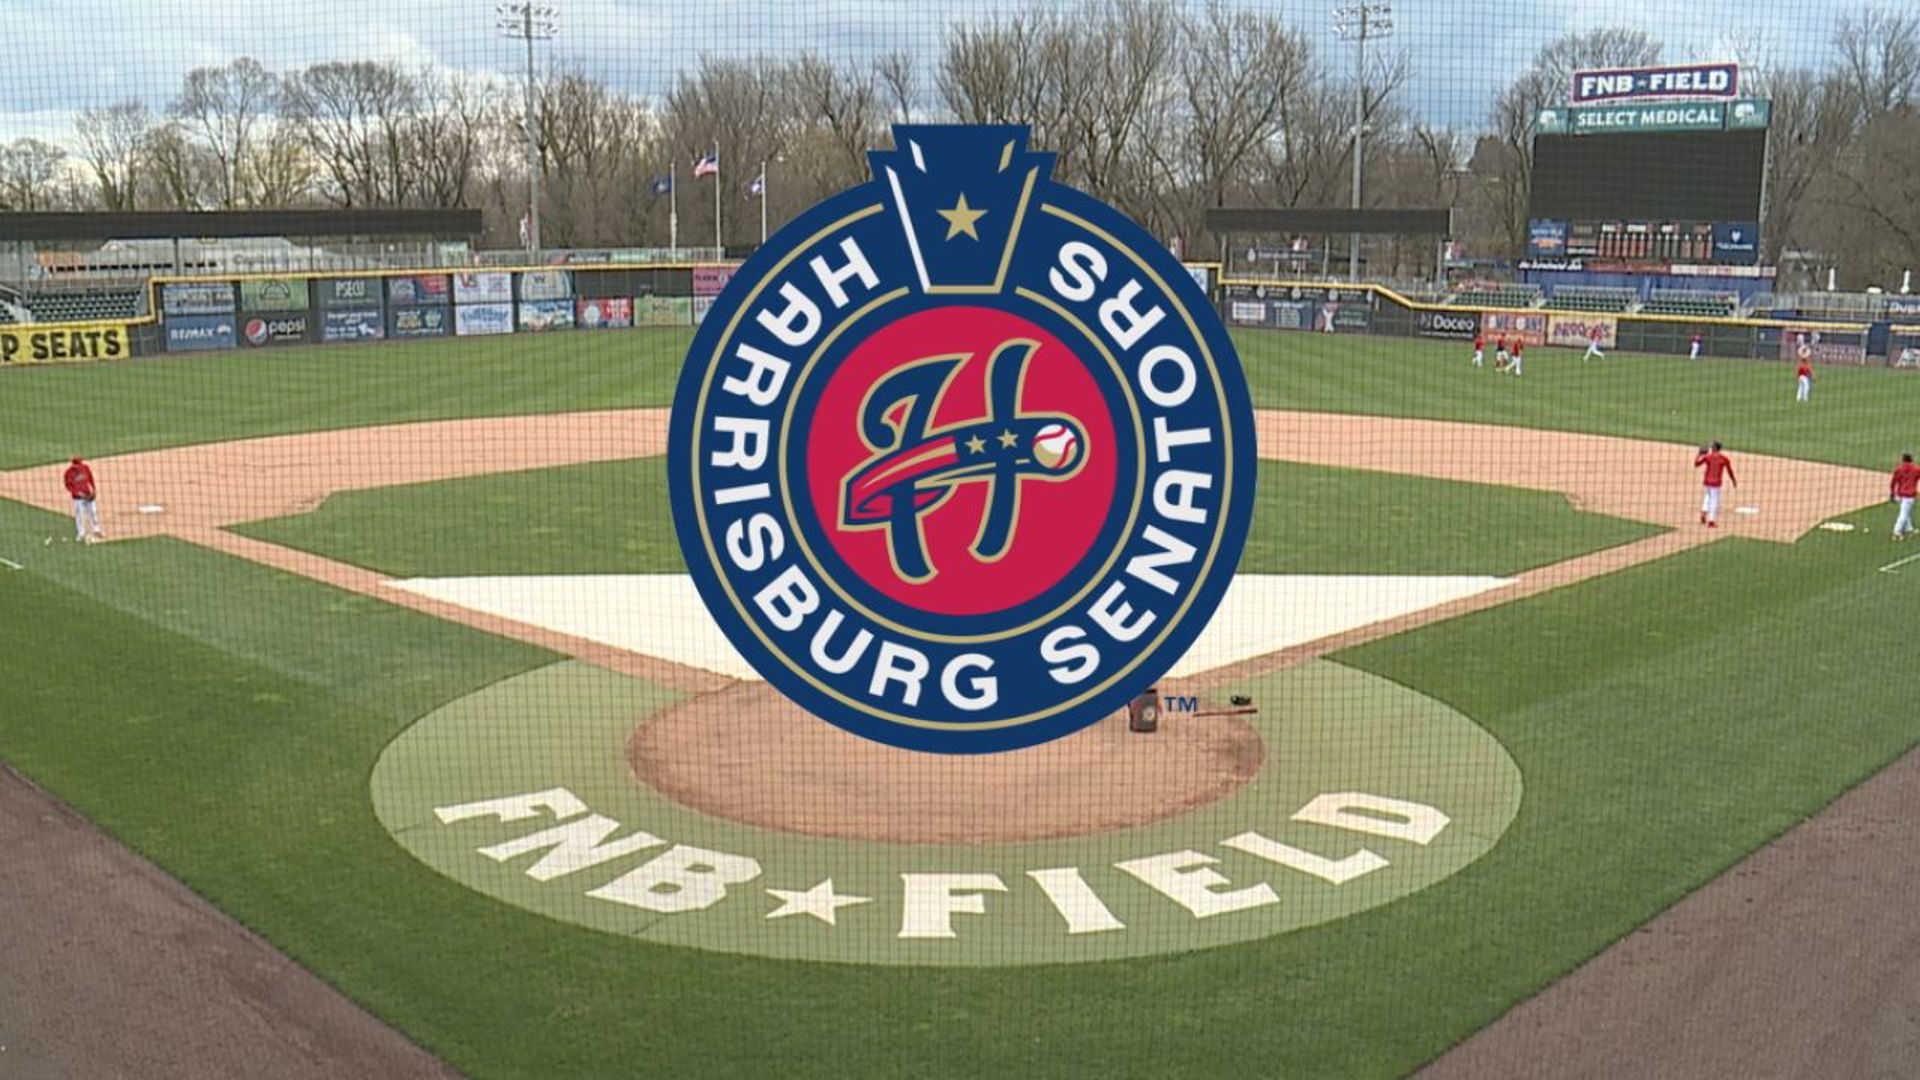 Peter Freund, CEO of Diamond Baseball Holdings, joins the Sunday Sports Frenzy to discuss acquiring the Harrisburg Senators.